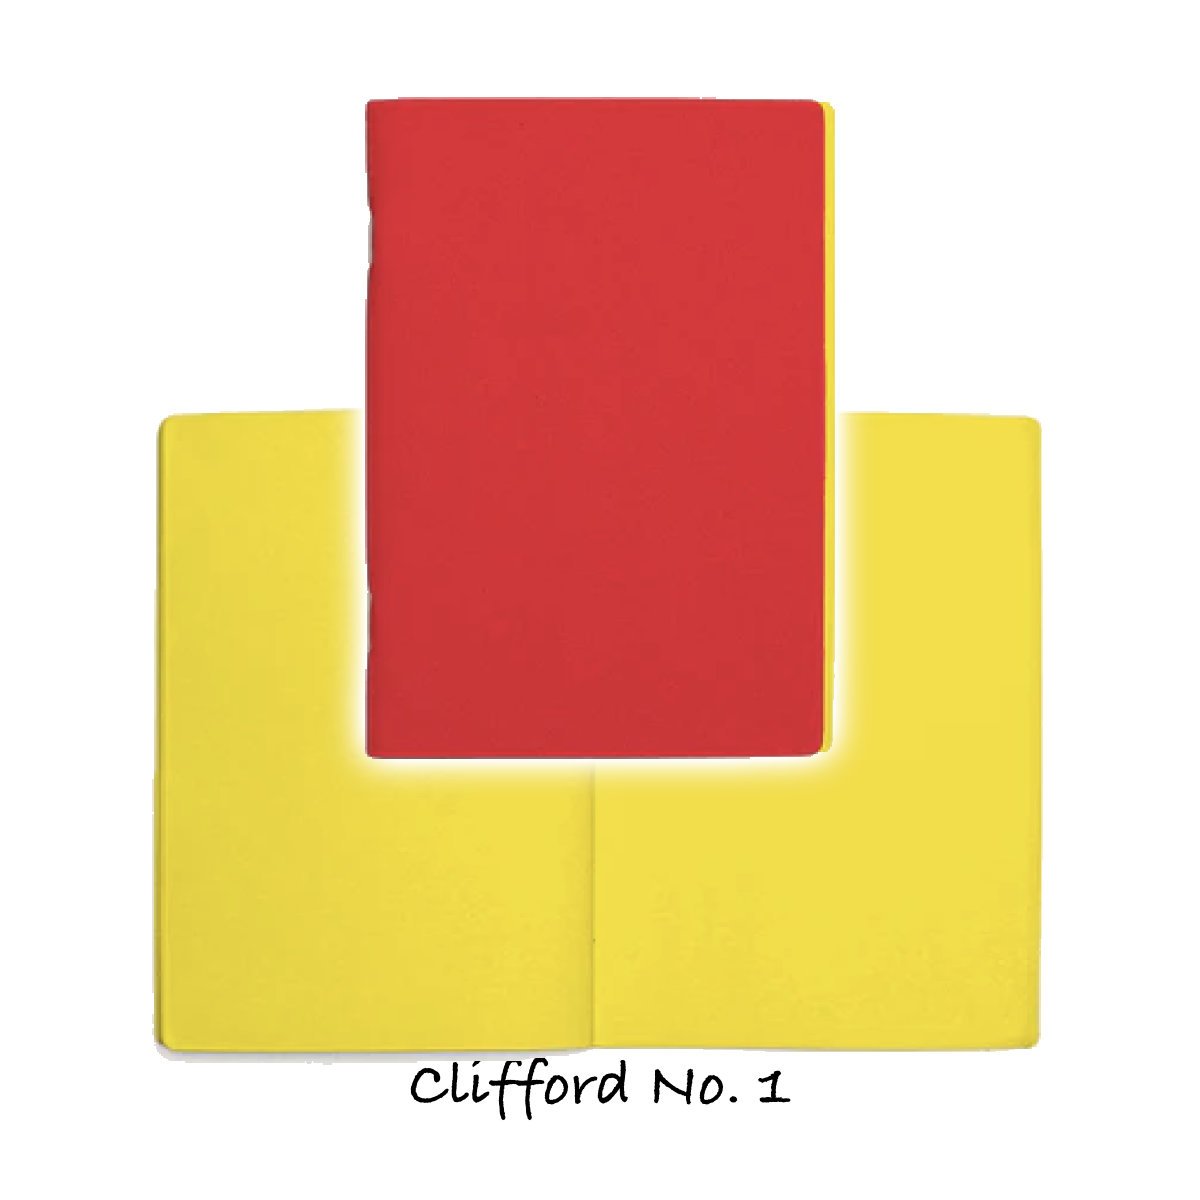 UGLYBOOKS - Clifford No. 1 - Single Notebook